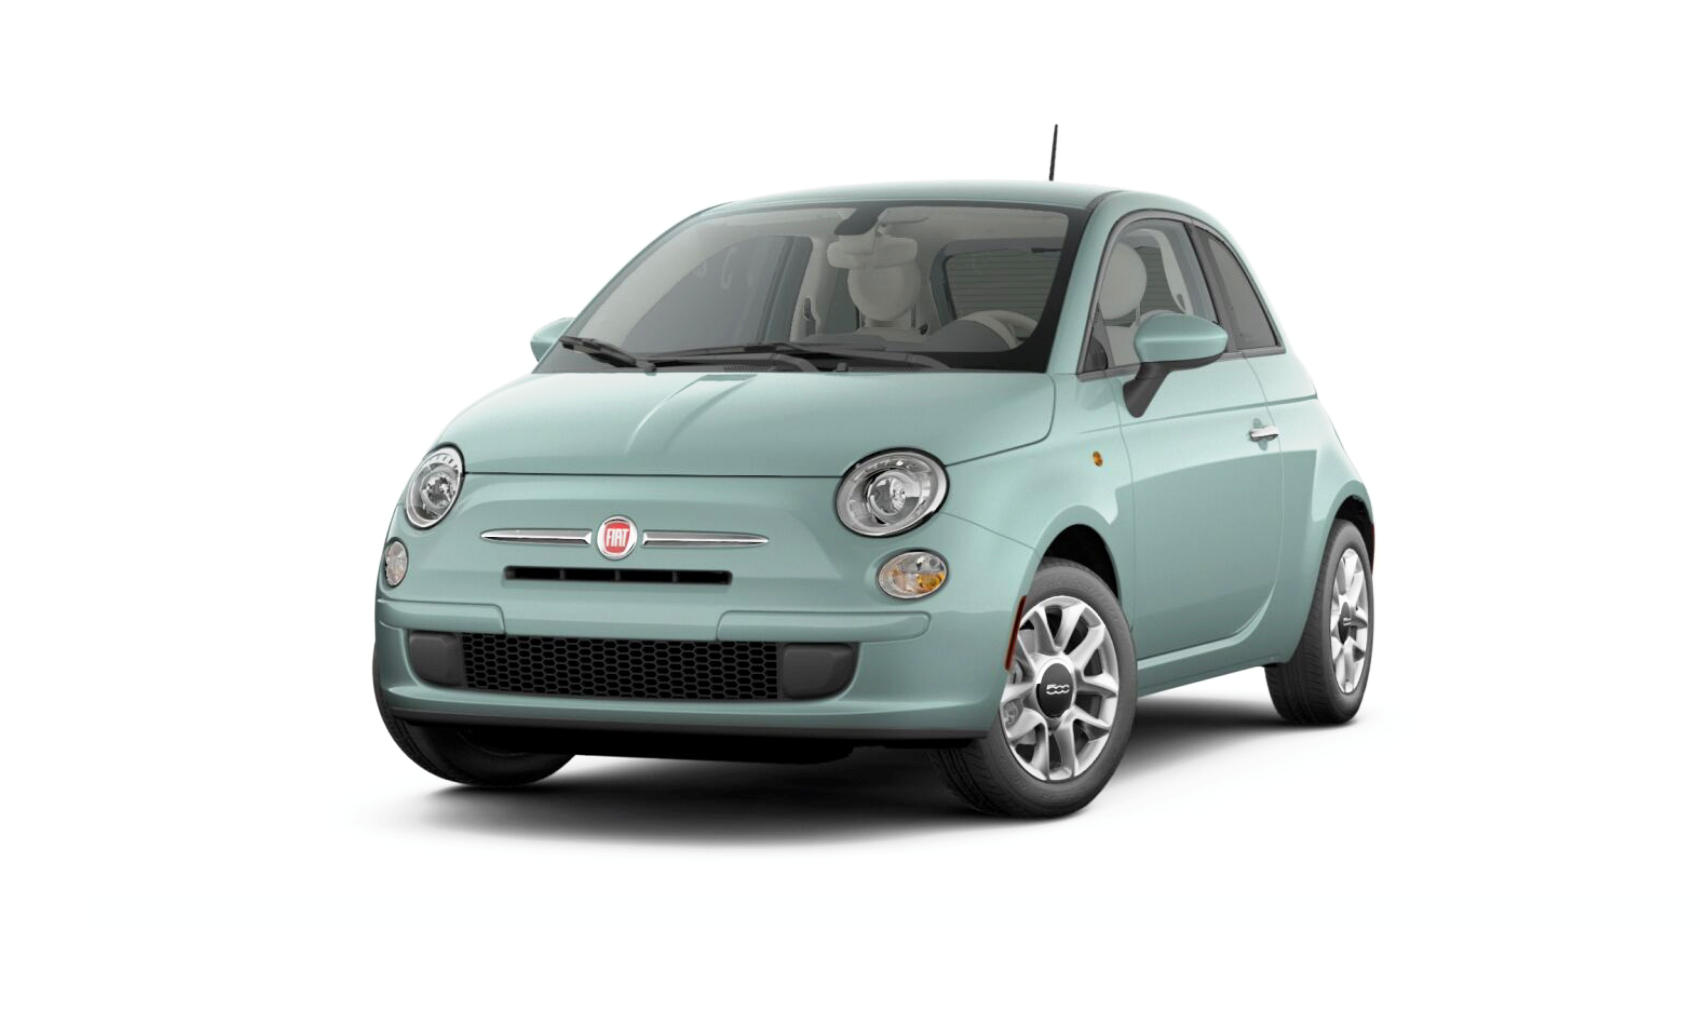 2019 Fiat 500 Retro Hatchback Full Specs, Features and